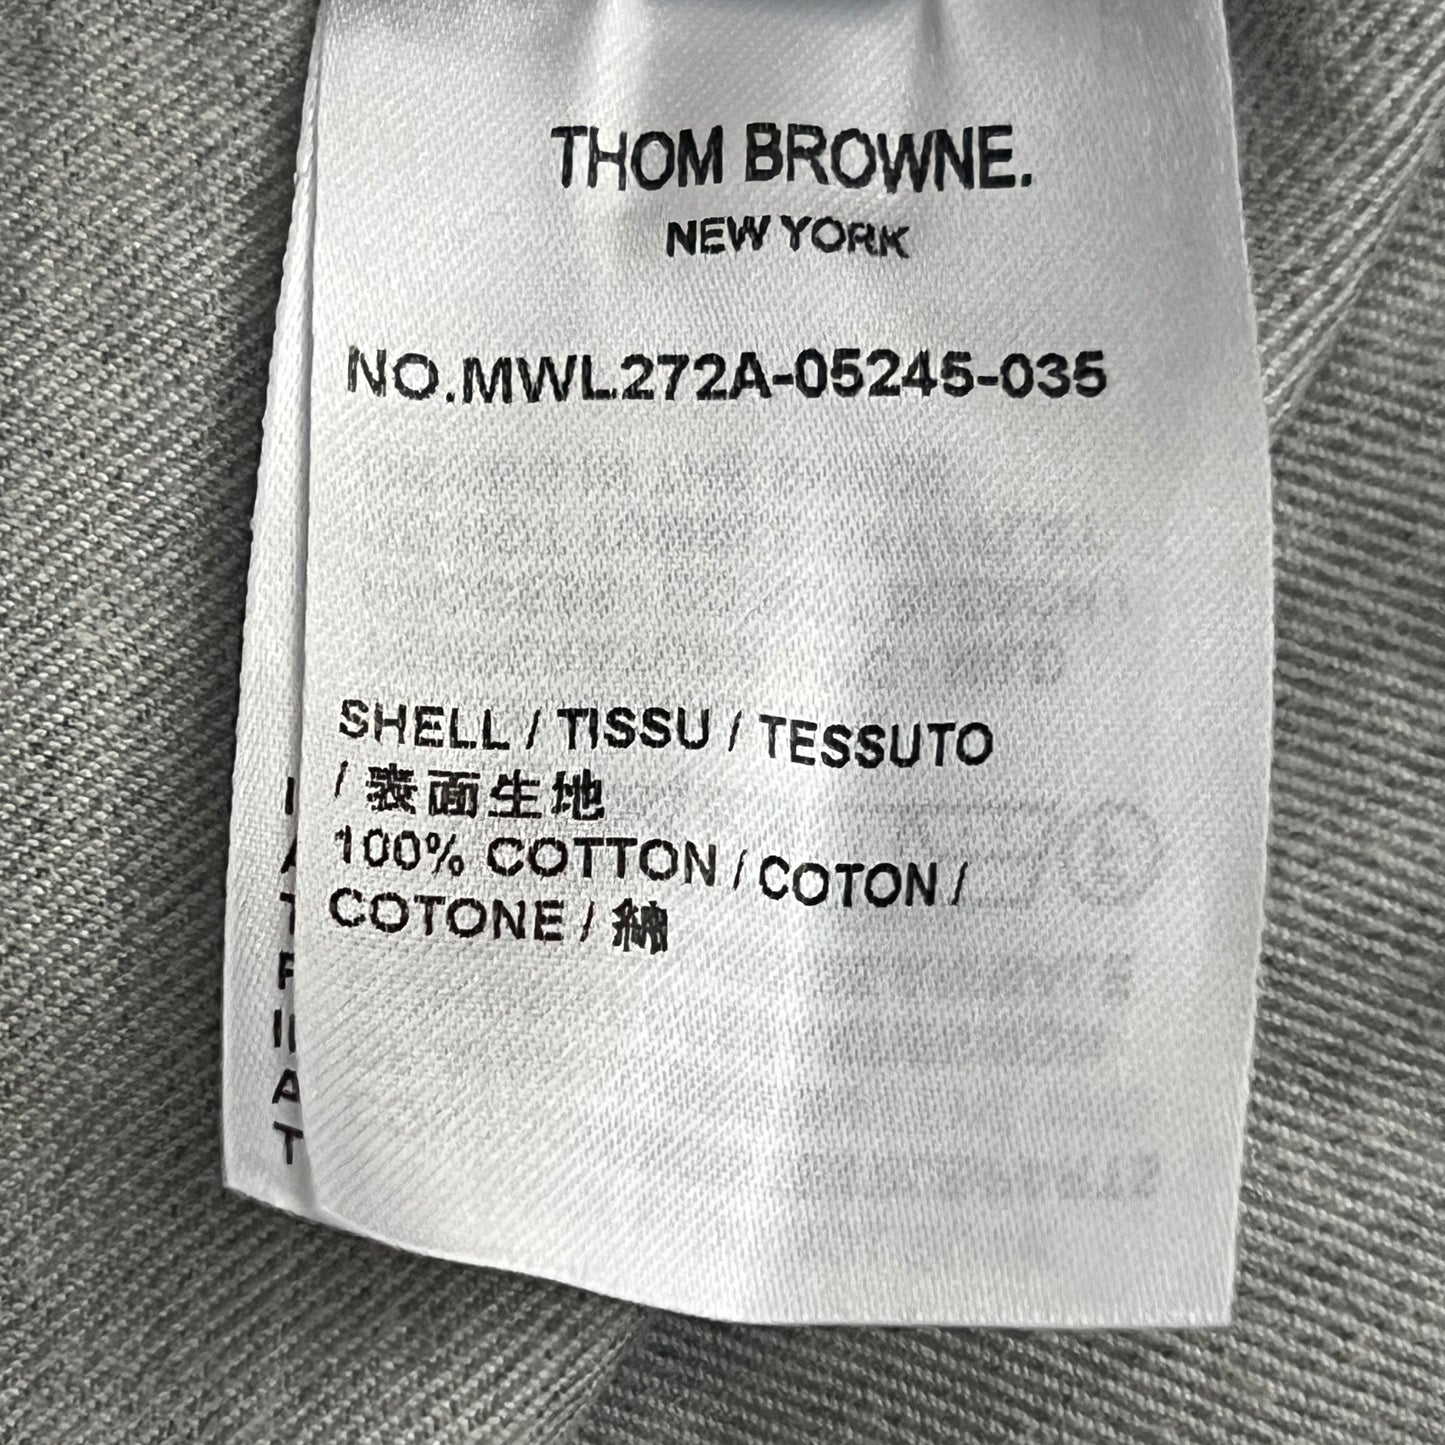 THOM BROWNE Straight Fit Button-Down Long Sleeve w/CB RWB Flannel shirt w/woven 4 Bar Sleeve in Med Grey Size 4 (NEW)